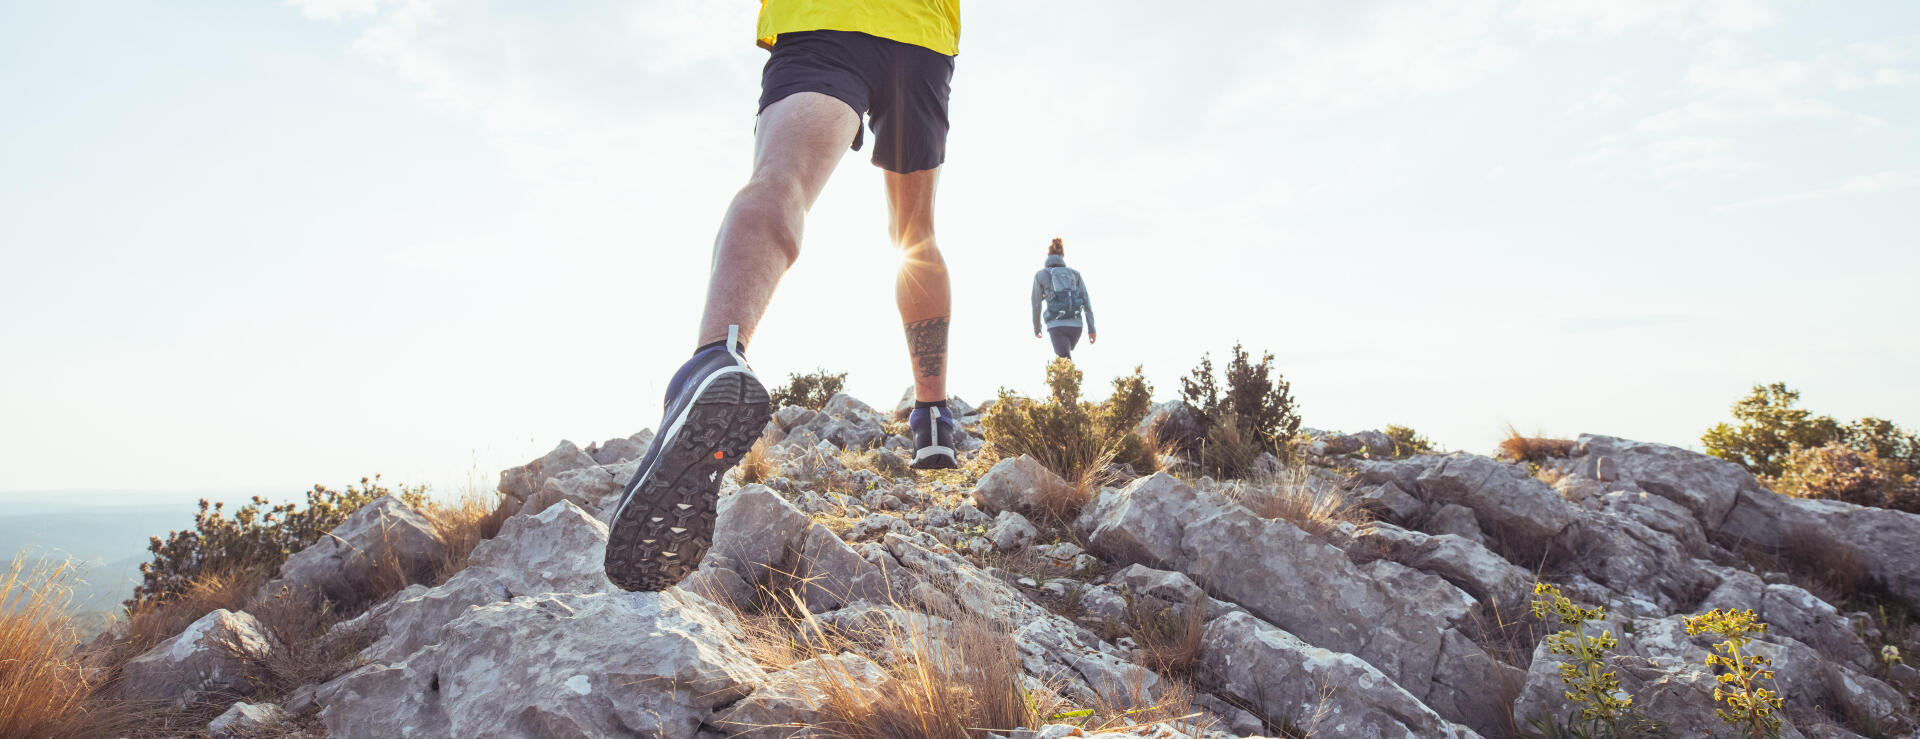 FAST HIKING : DRIVING FORCE OF INNOVATION